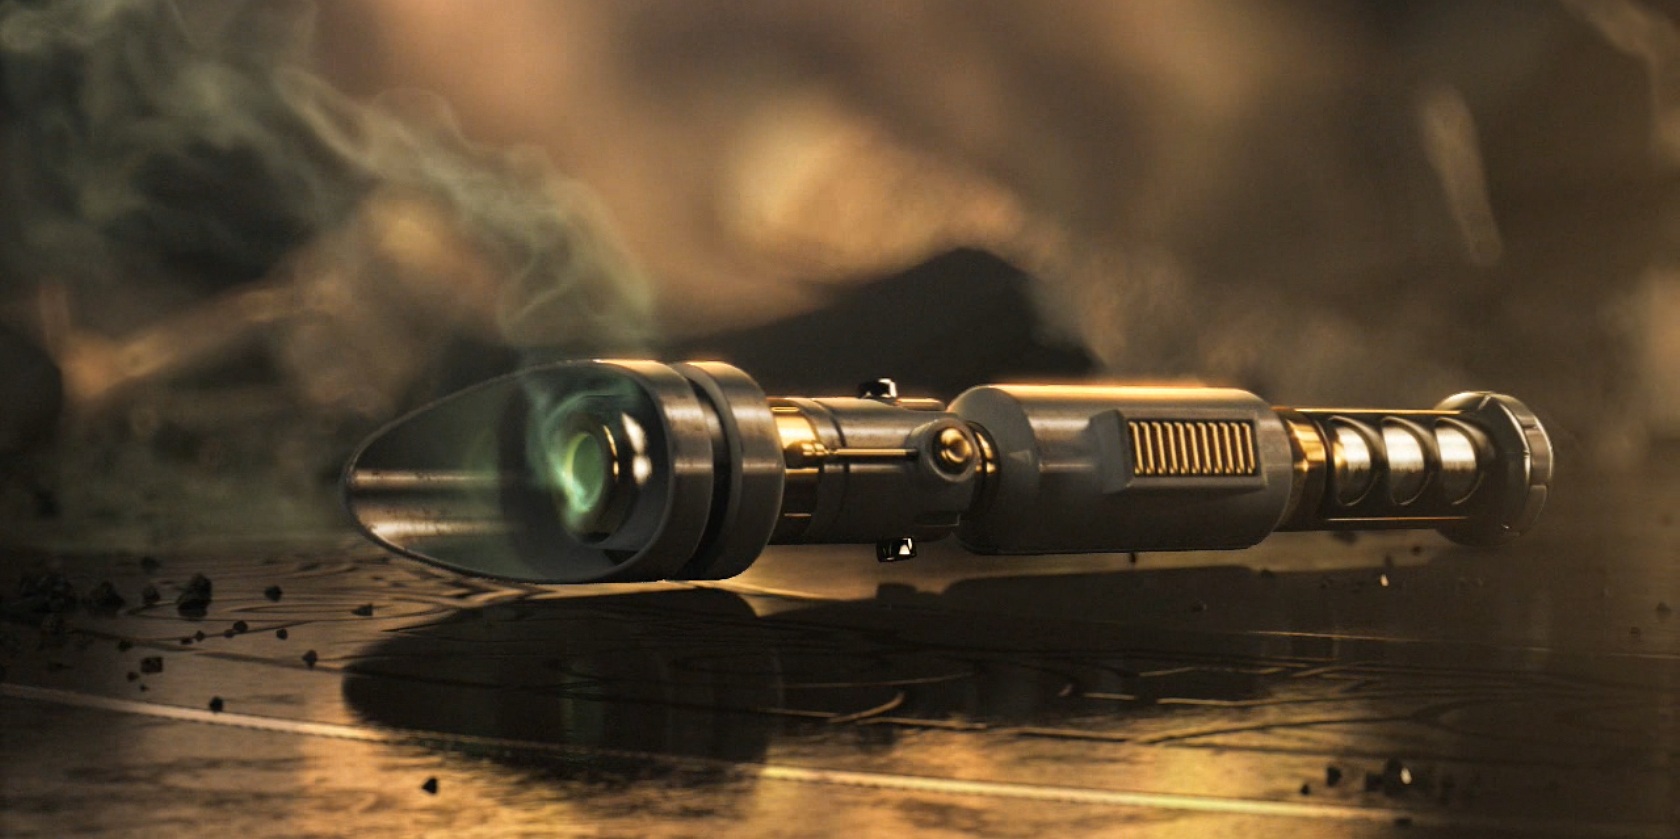 Lightsaber HD Wallpaper and Background